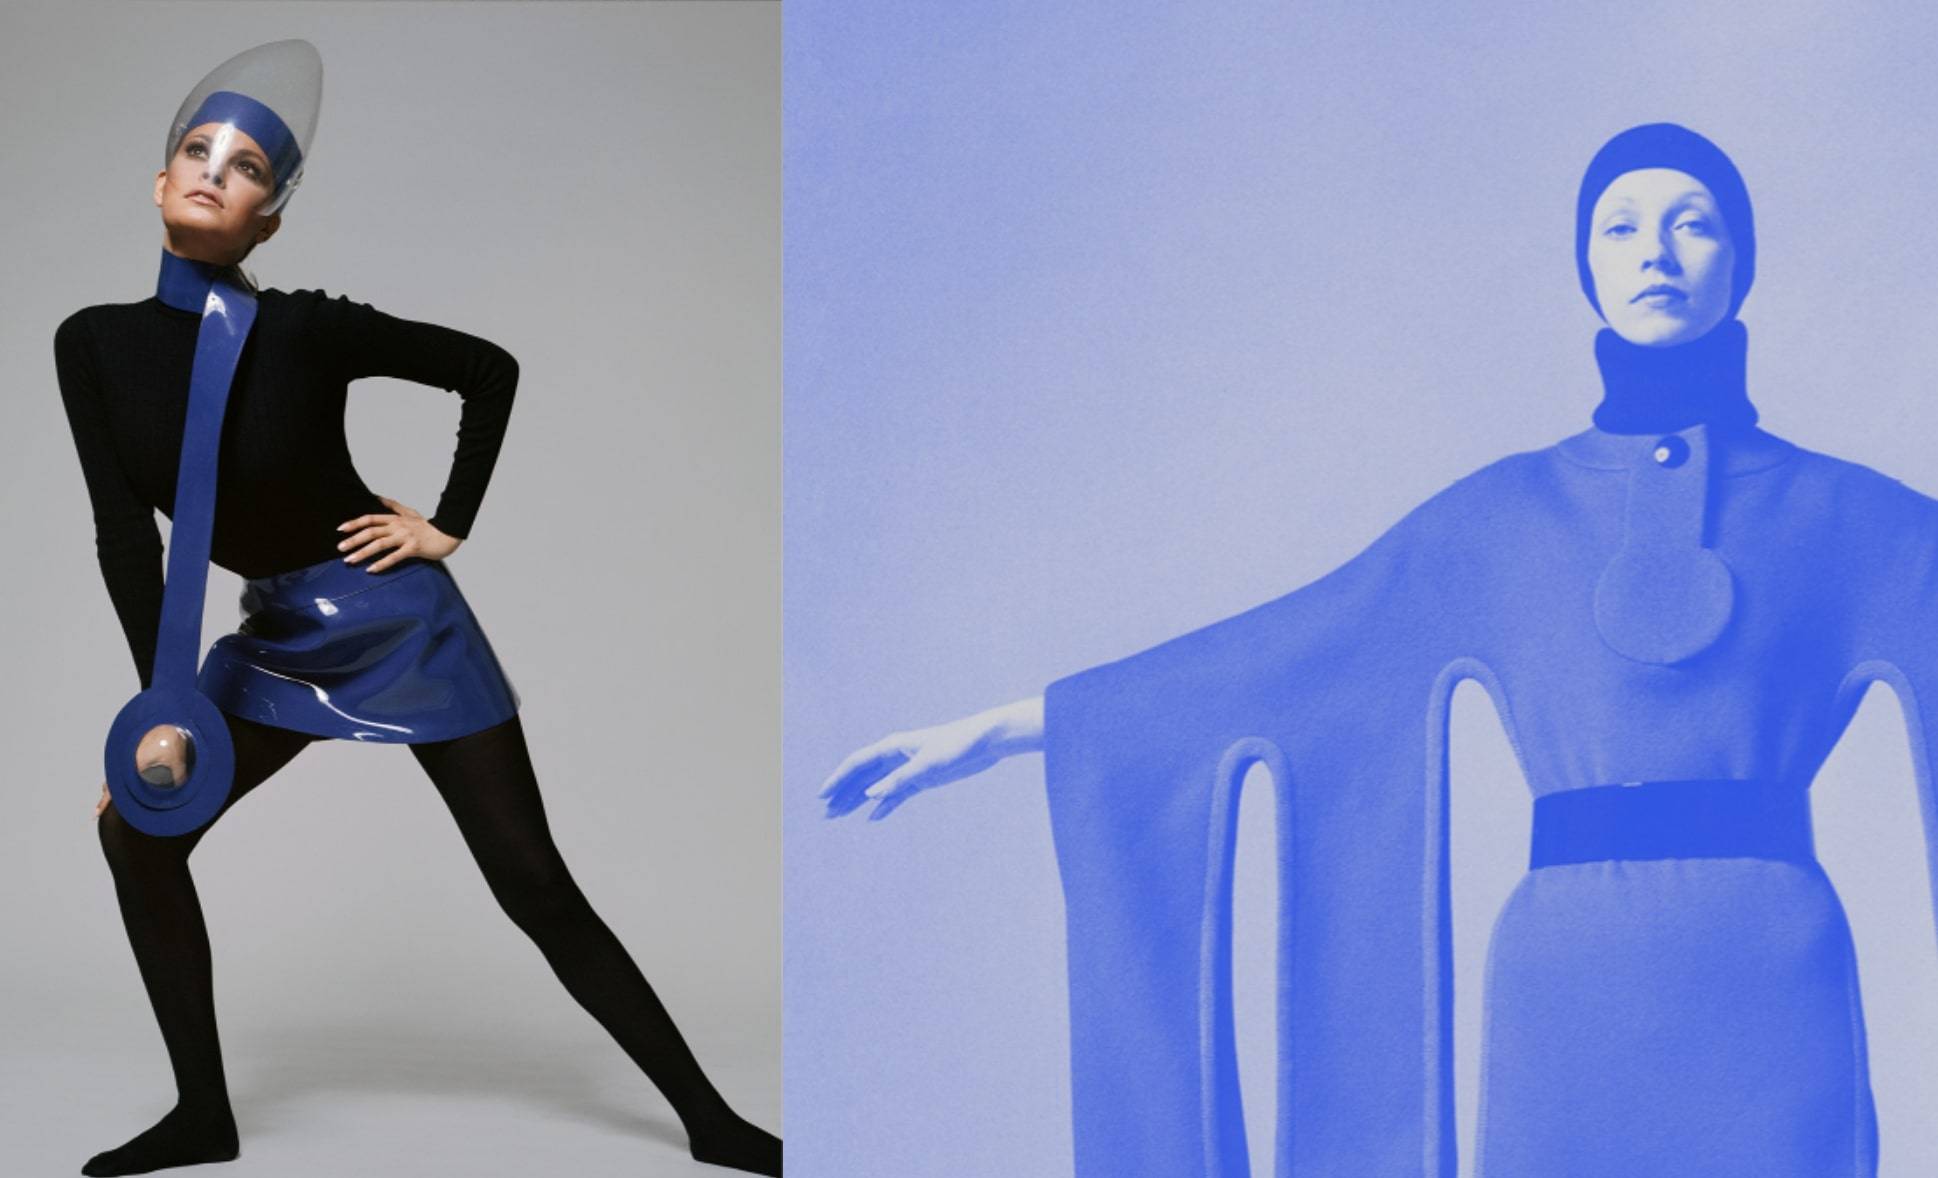 Pierre Cardin Celebrates 70 Years In Fashion With a Retrospective Show at  Vanderbilt Mansion